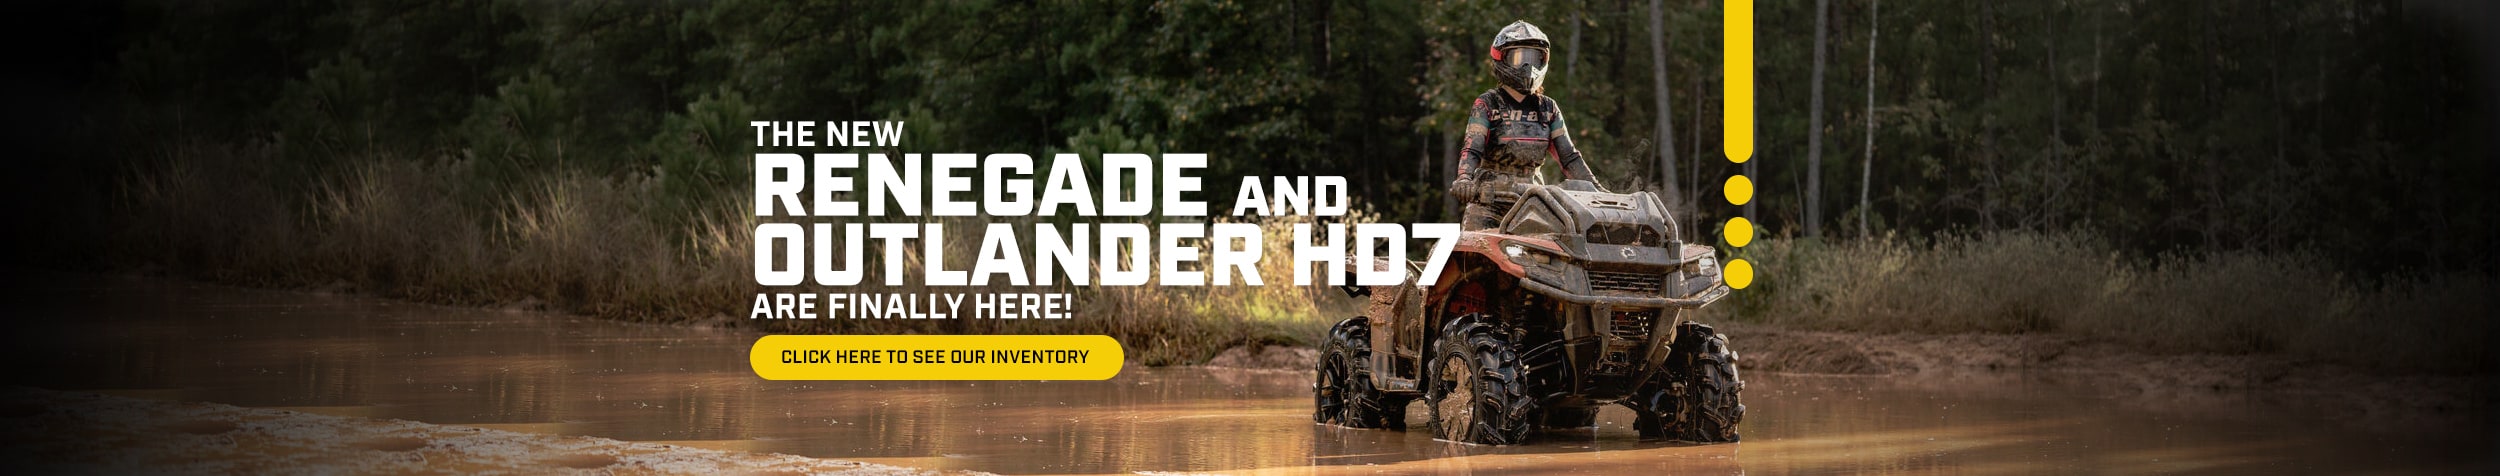 The new Renegade and Outlander HD7 are finally here!